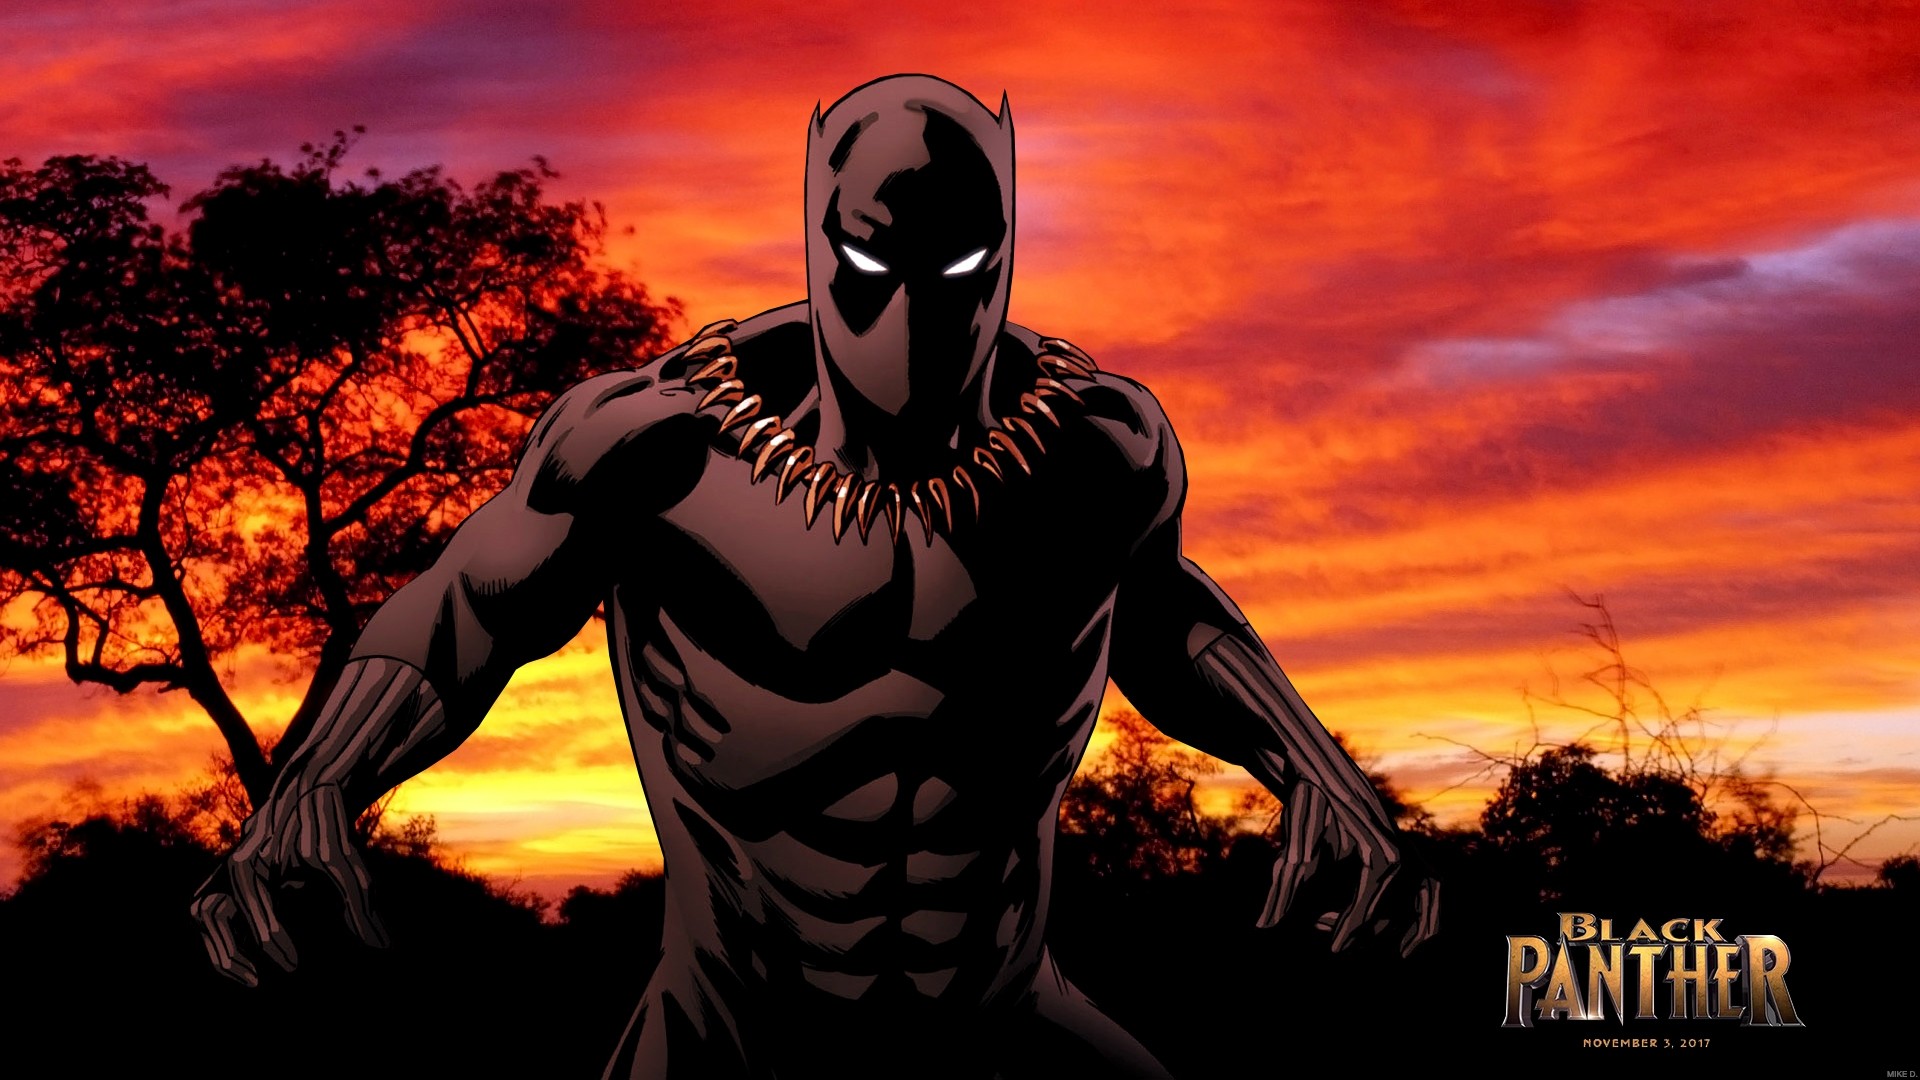 Black Panther Wallpaper ① Download Free Amazing Hd Backgrounds For